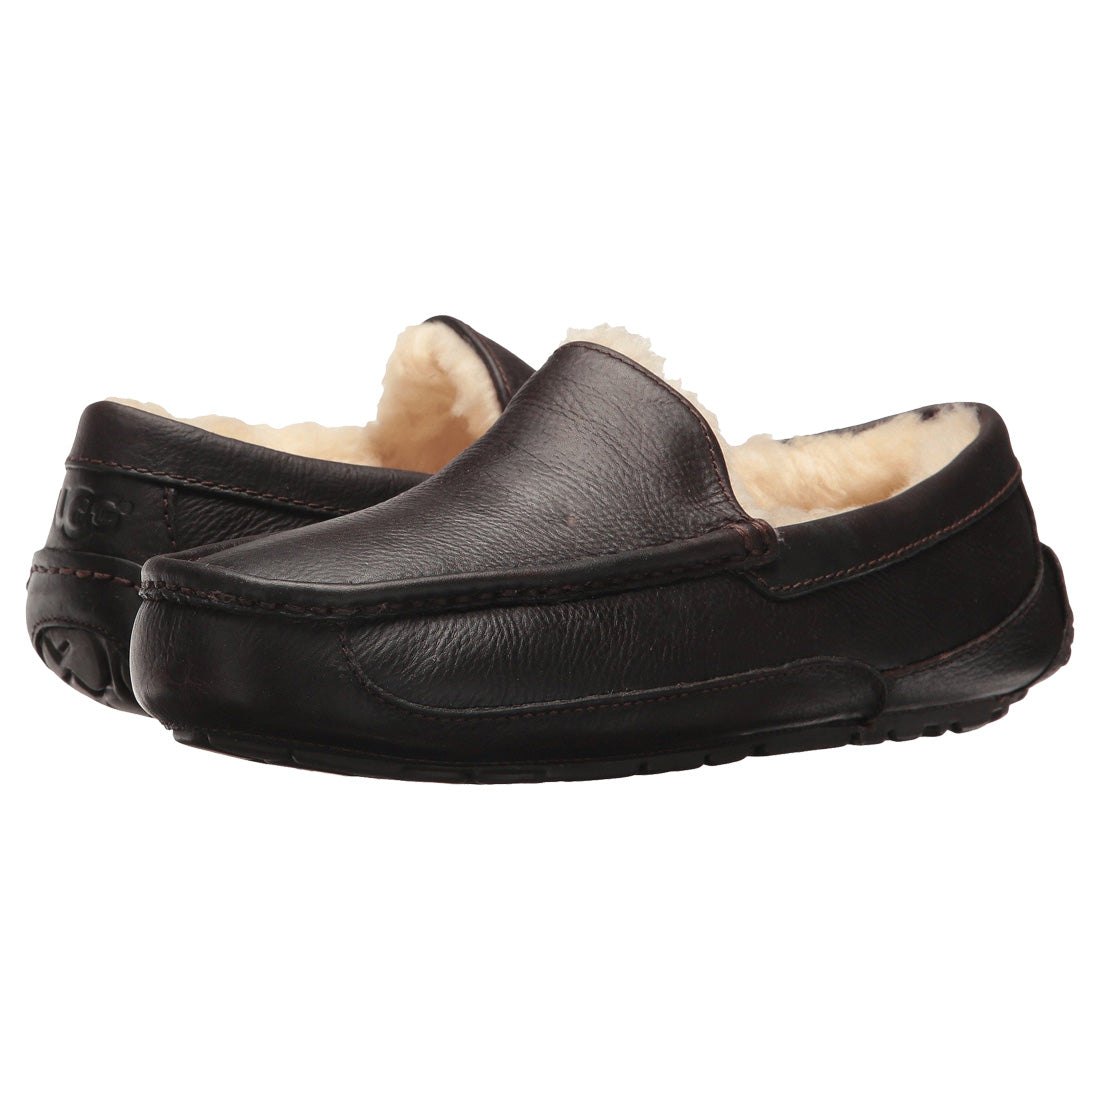 UGG Ascot Leather - Men's